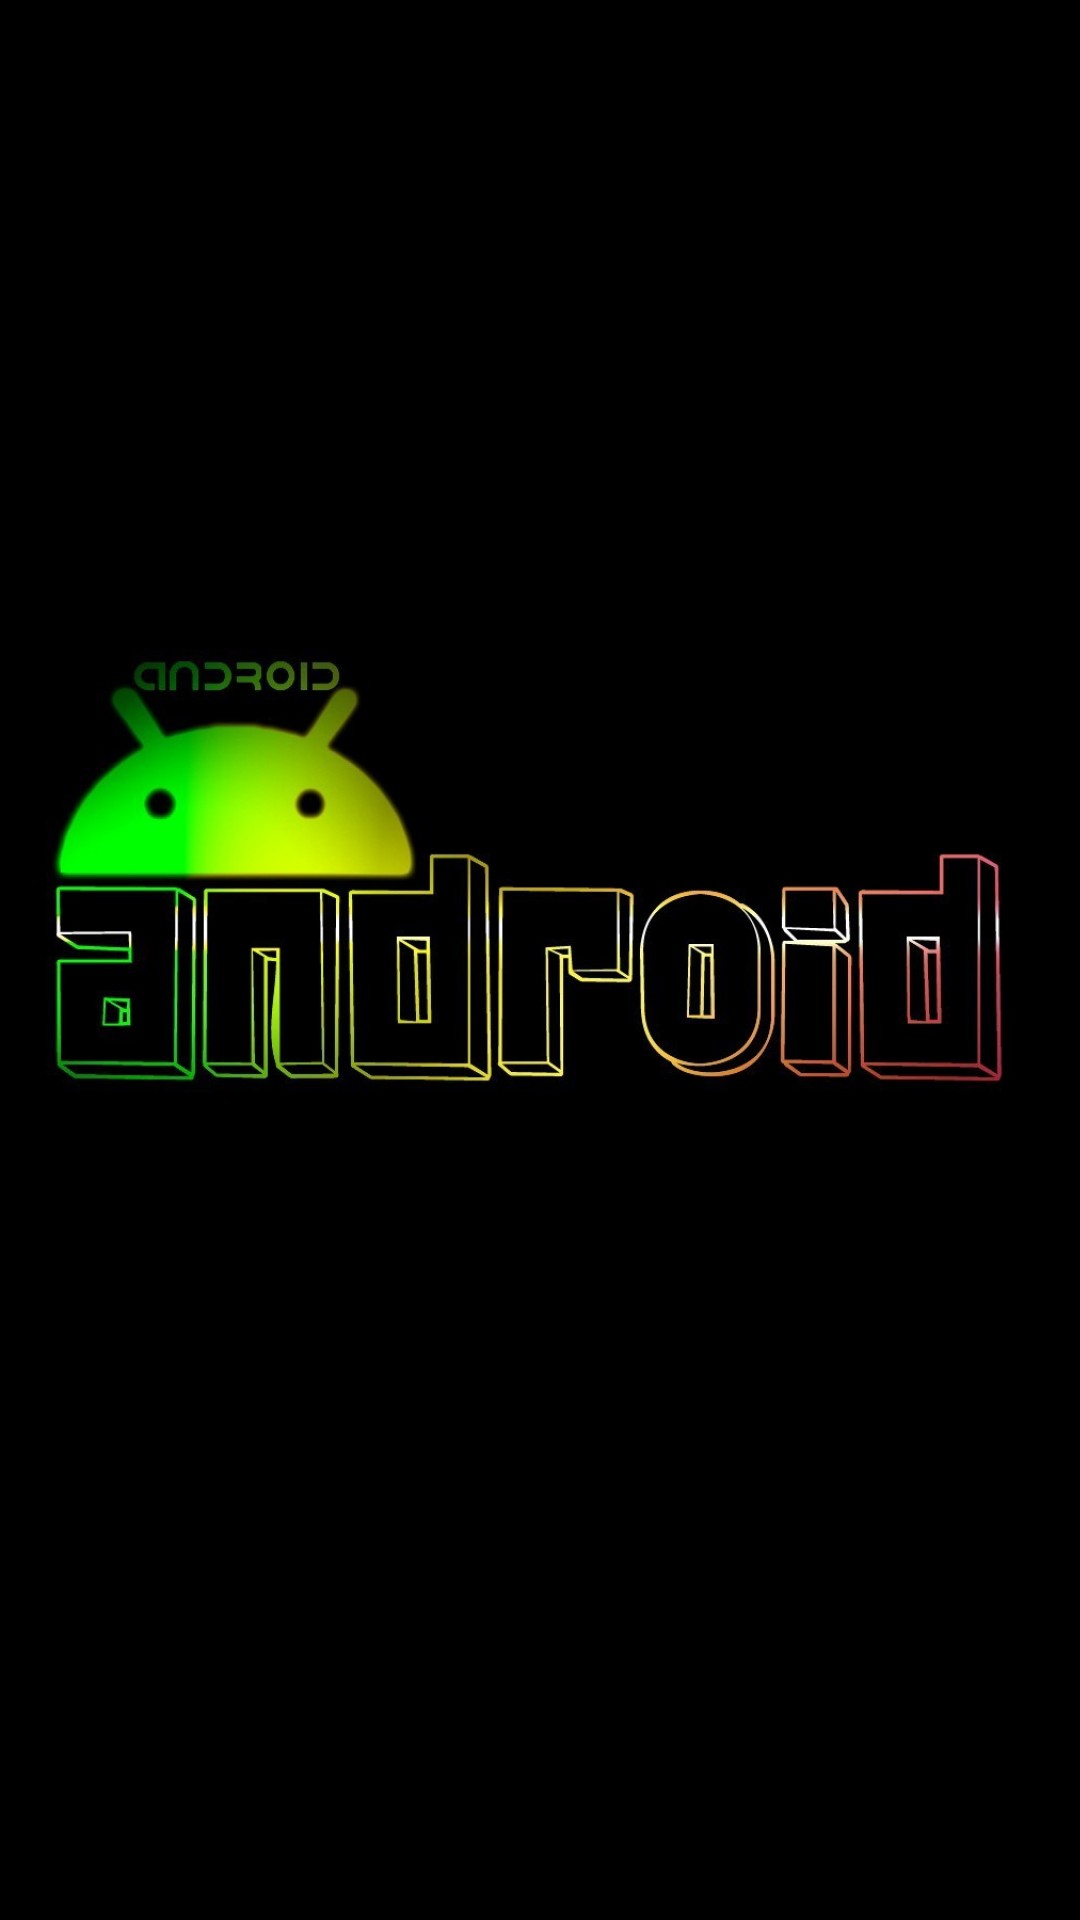 Free download hd android logo wallpaper for mobile 1080x1920 [1080x1920